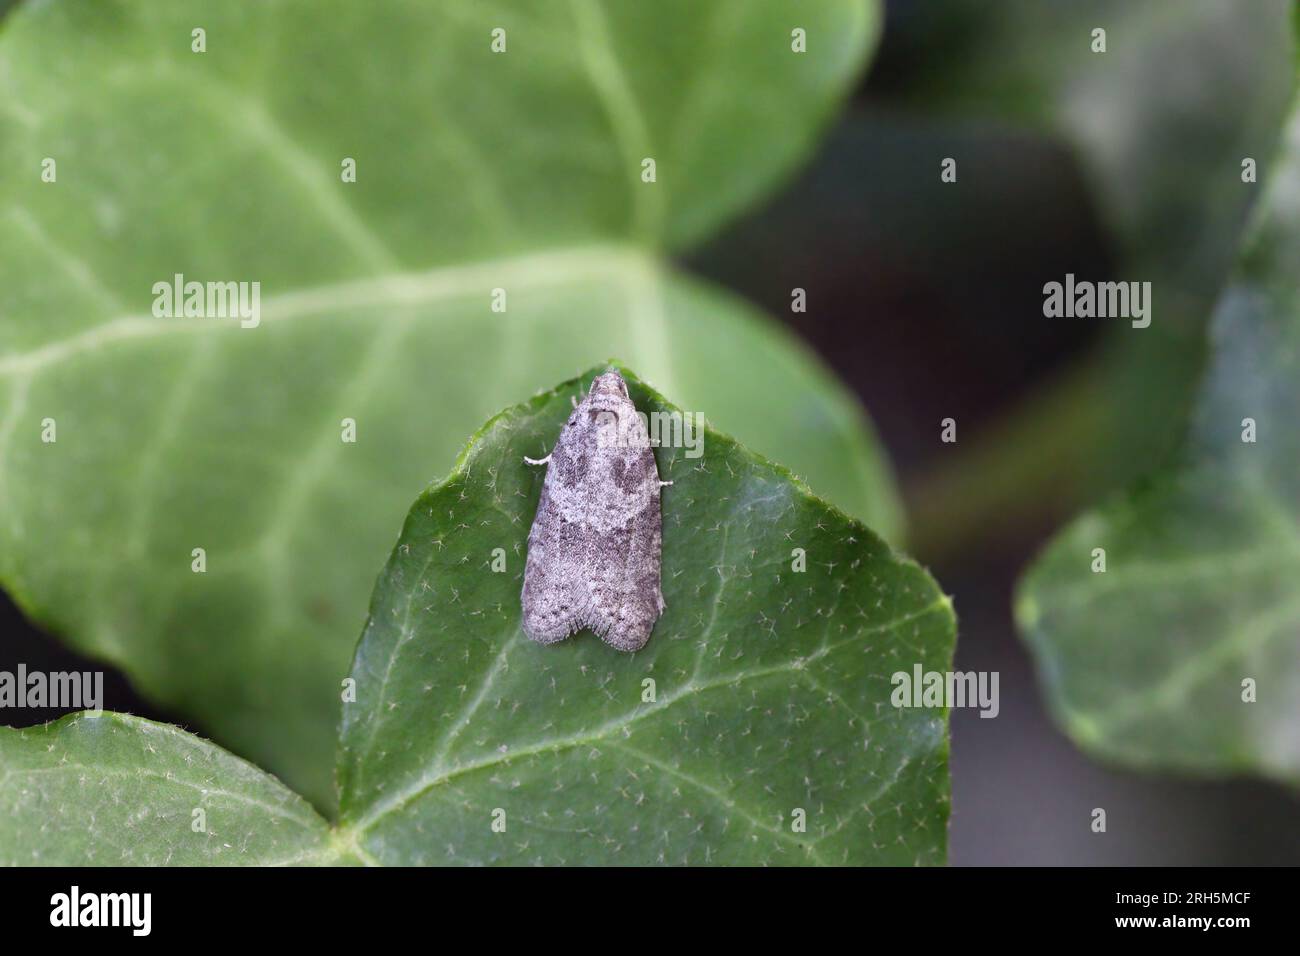 Cnephasia pasiuana pumicana moth in the family Tortricidae. Sitting on a green leaf. Stock Photo